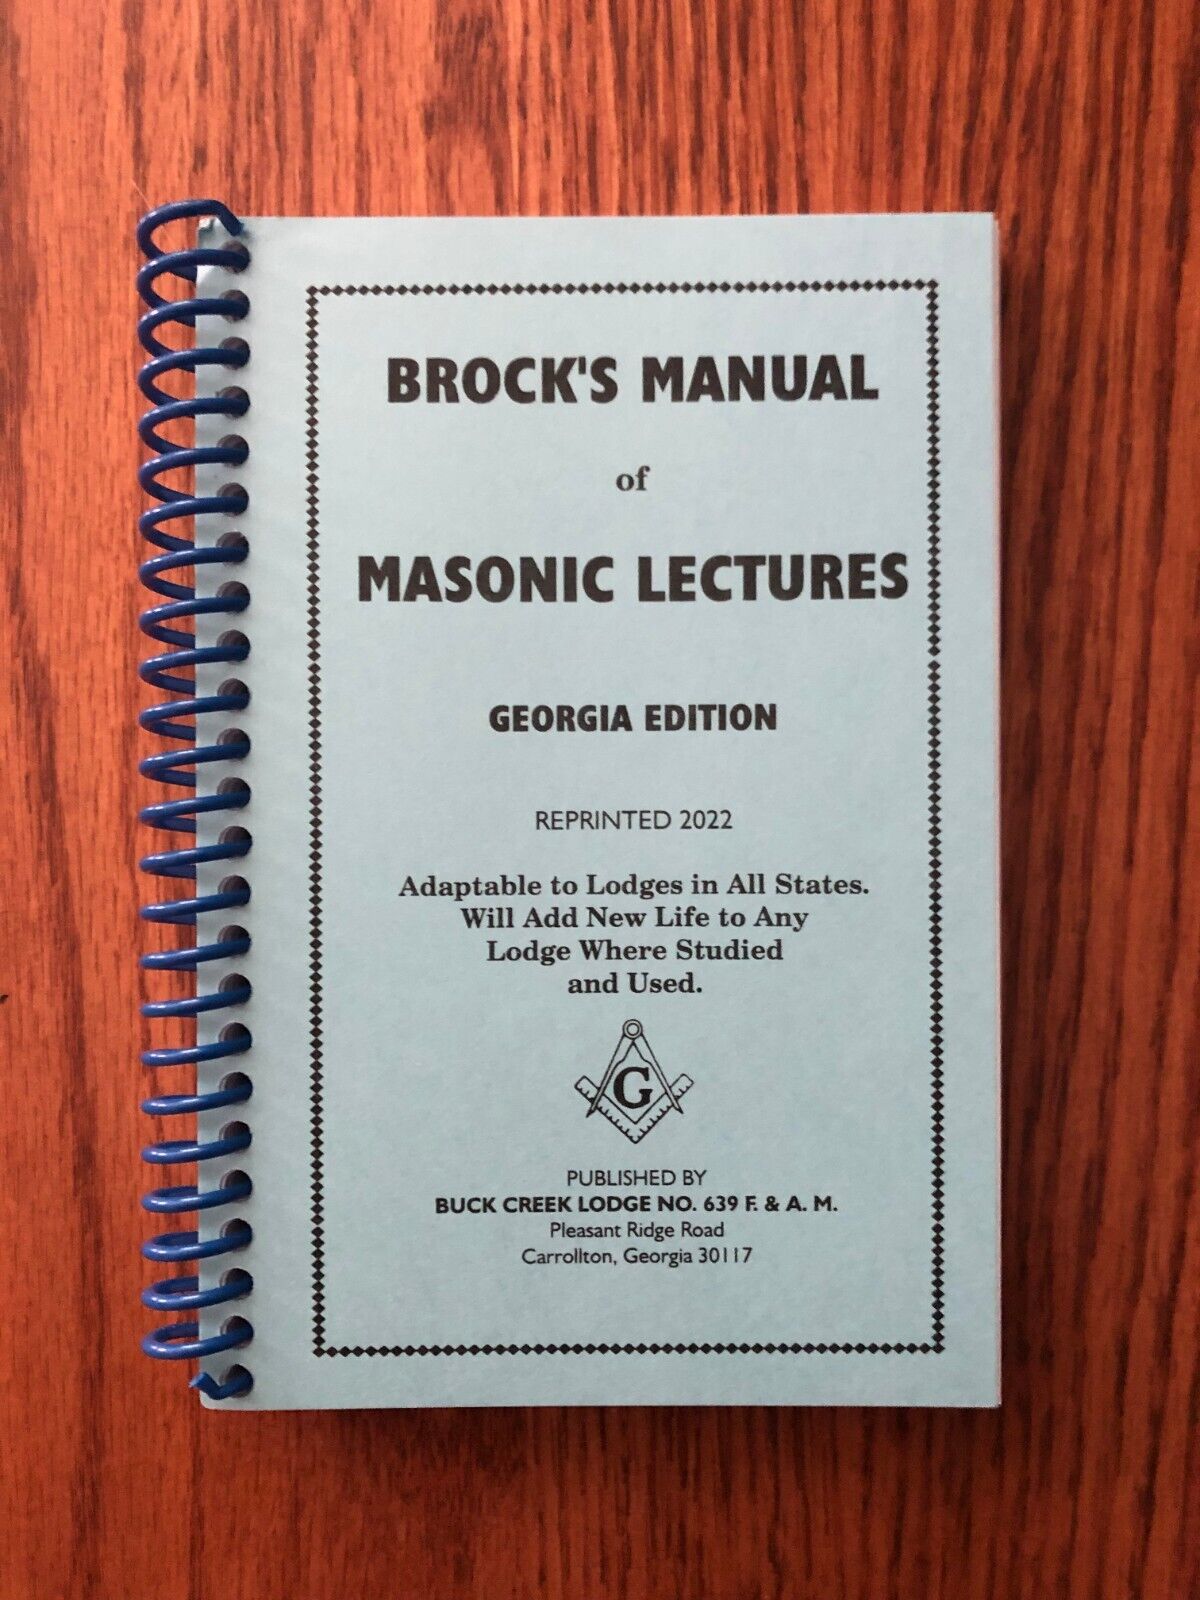 Brock’s Manual of Masonic Lectures Georgia Edition 2022 NEW Never Been Used